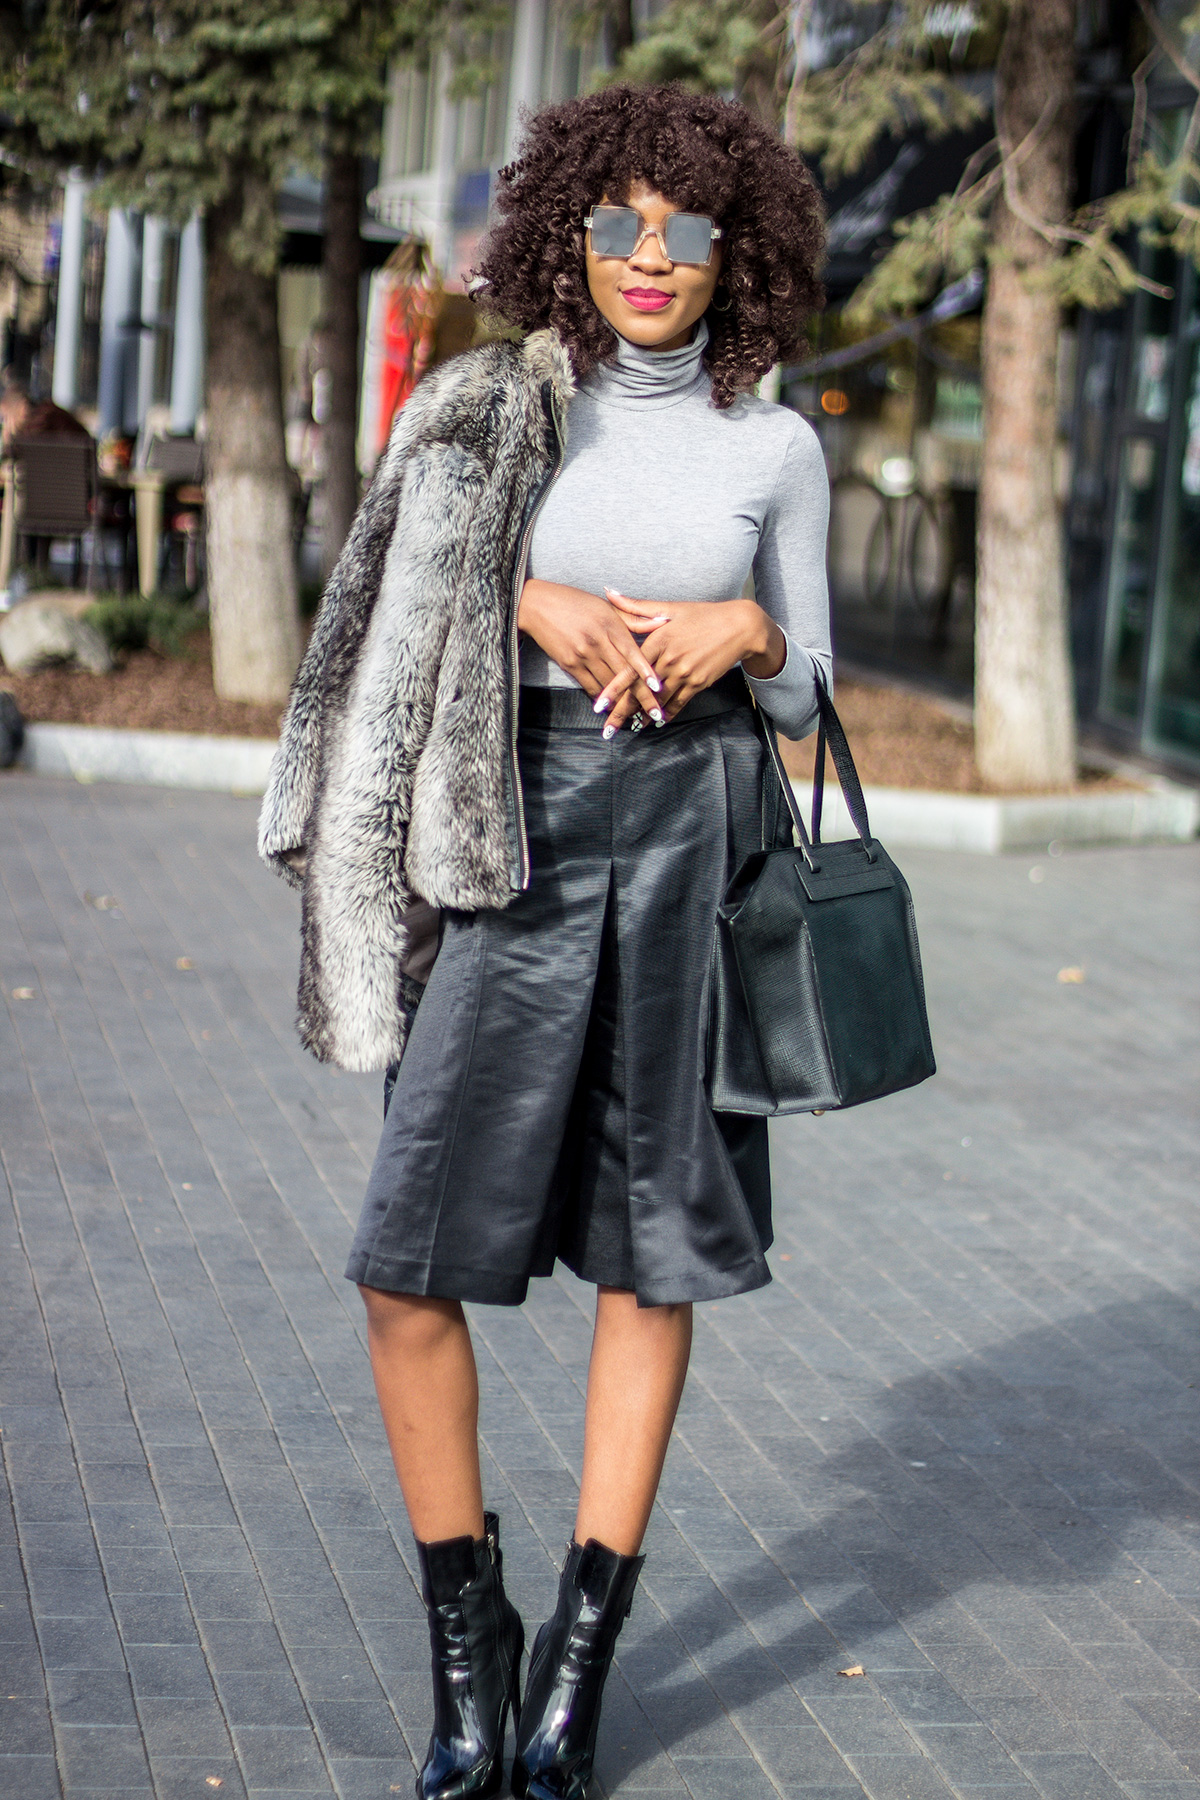 Styling culottes in fall with dark colors